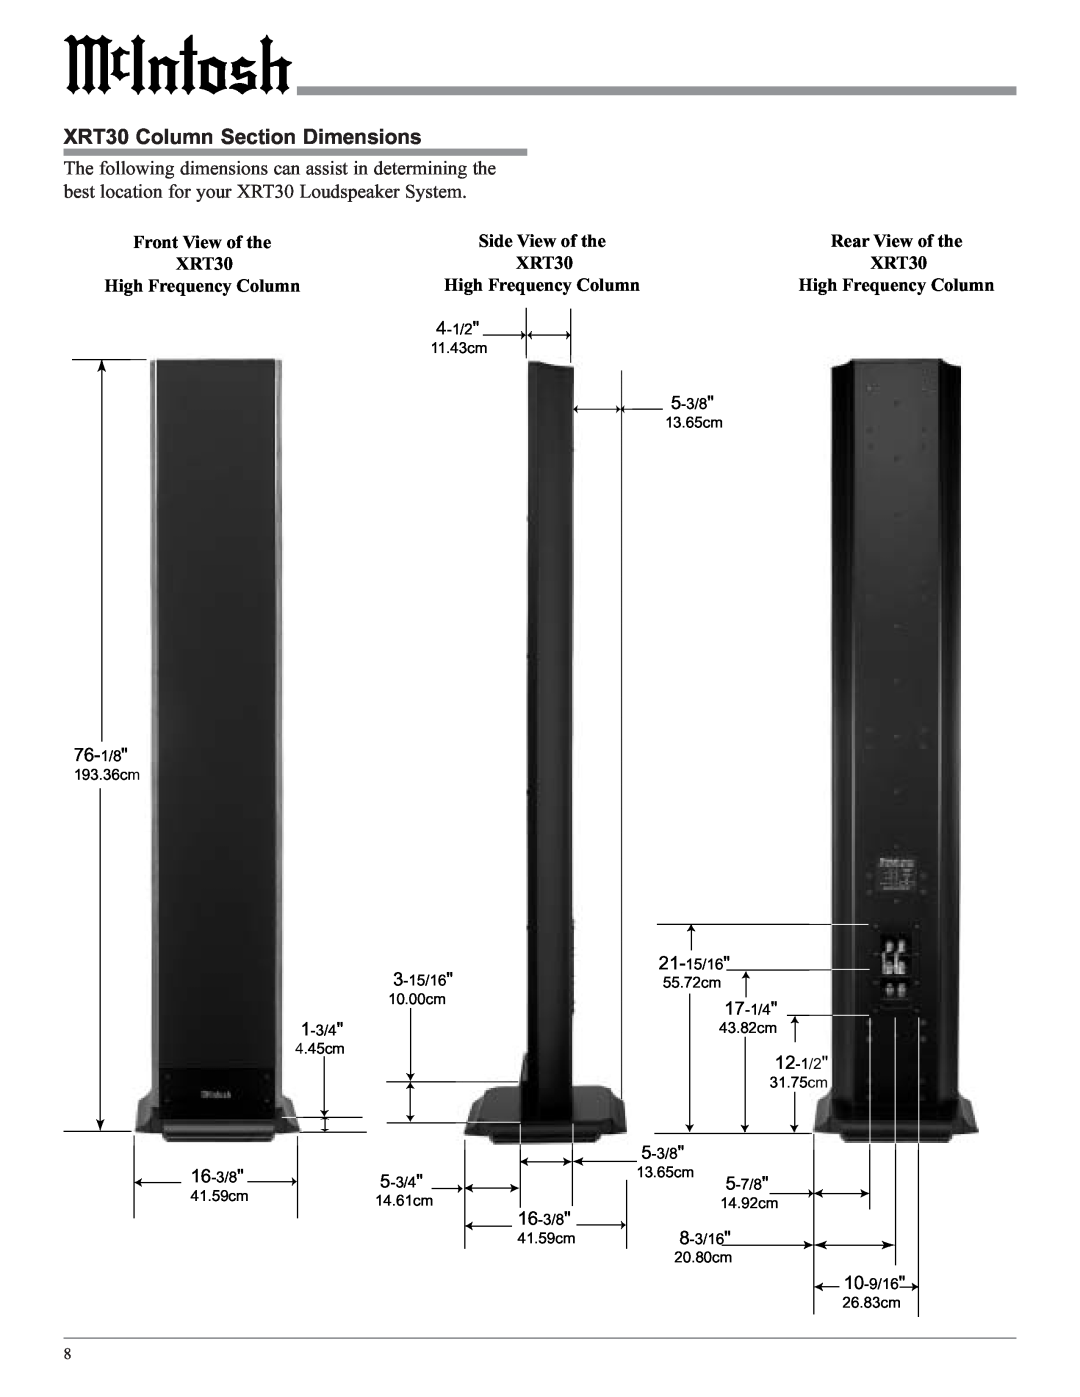 McIntosh owner manual XRT30 Column Section Dimensions, Front View of the XRT30 High Frequency Column, 76-1/8, 16-3/8 